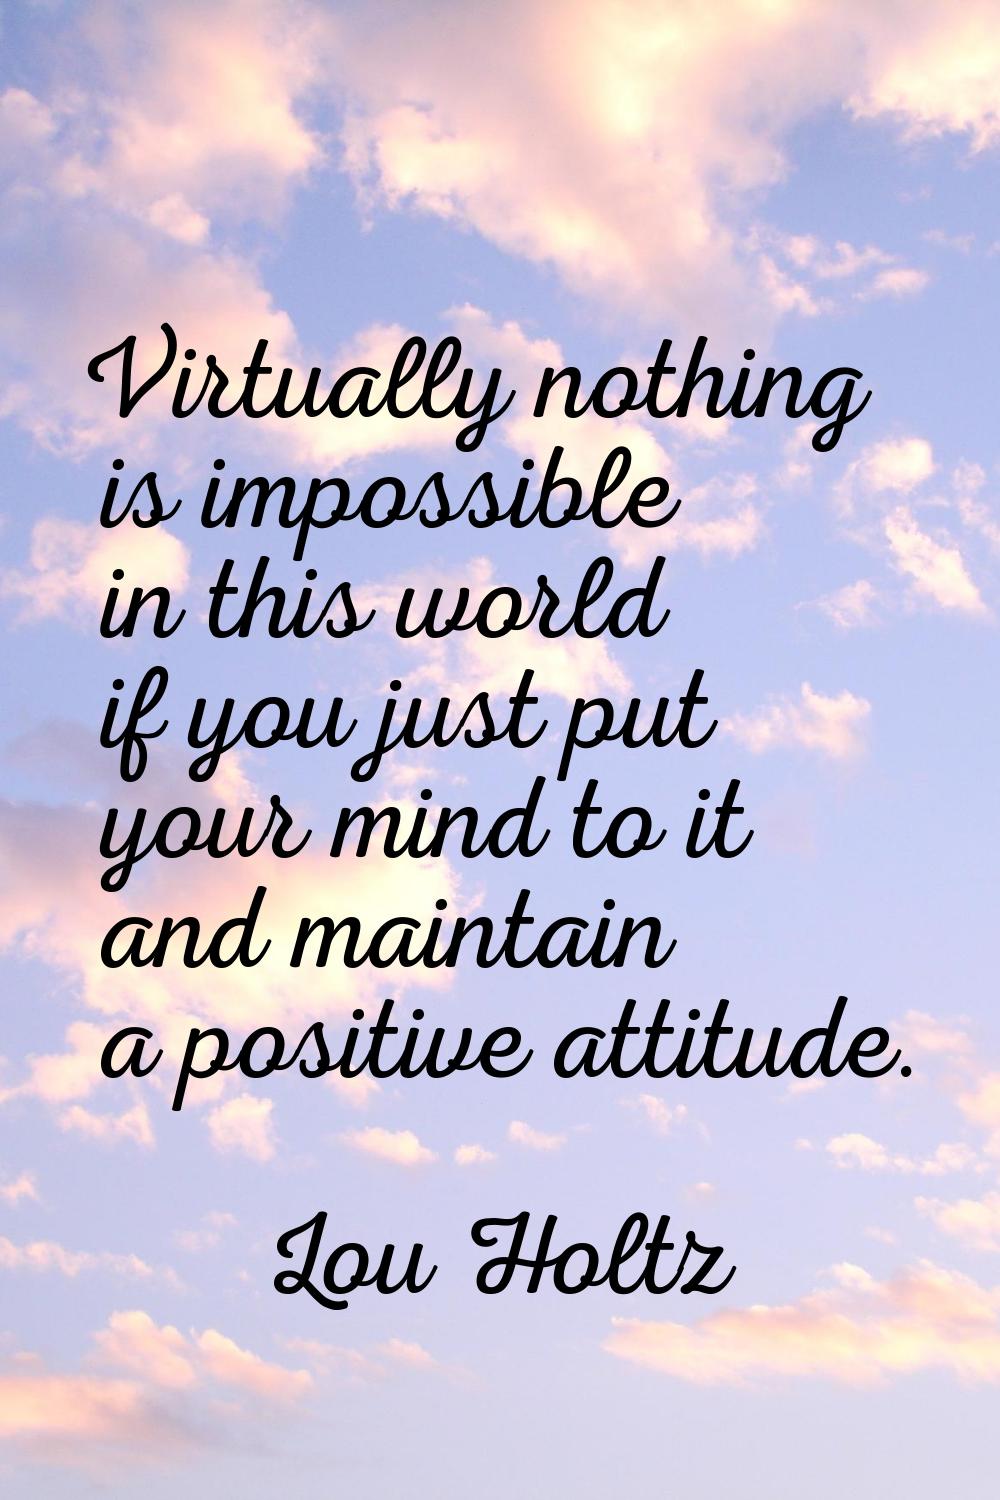 Virtually nothing is impossible in this world if you just put your mind to it and maintain a positi